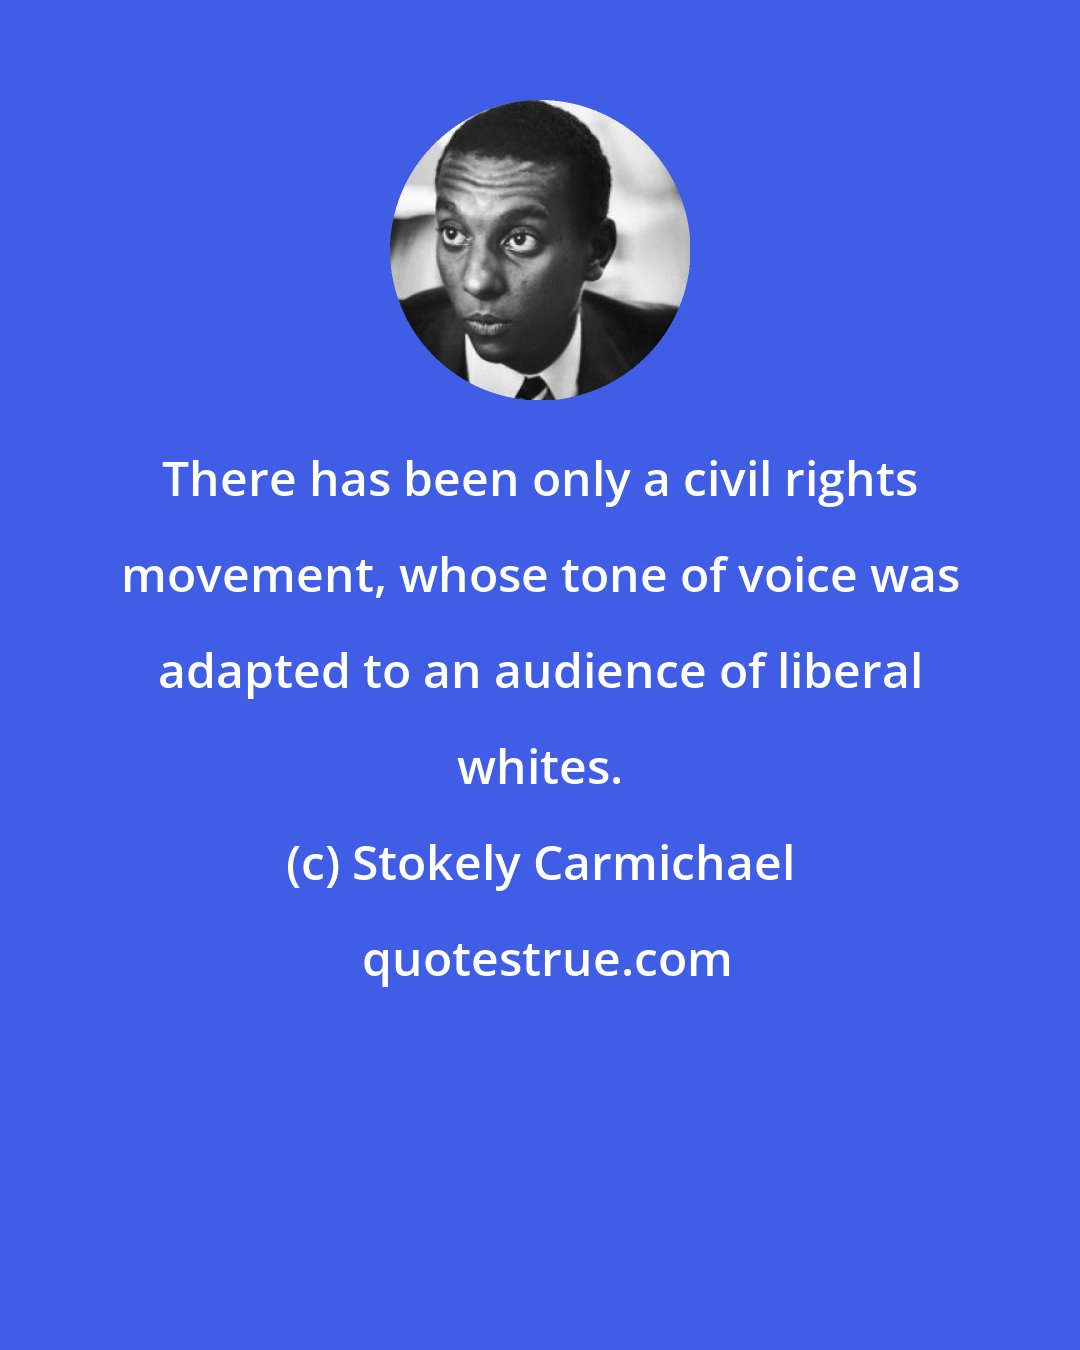 Stokely Carmichael: There has been only a civil rights movement, whose tone of voice was adapted to an audience of liberal whites.